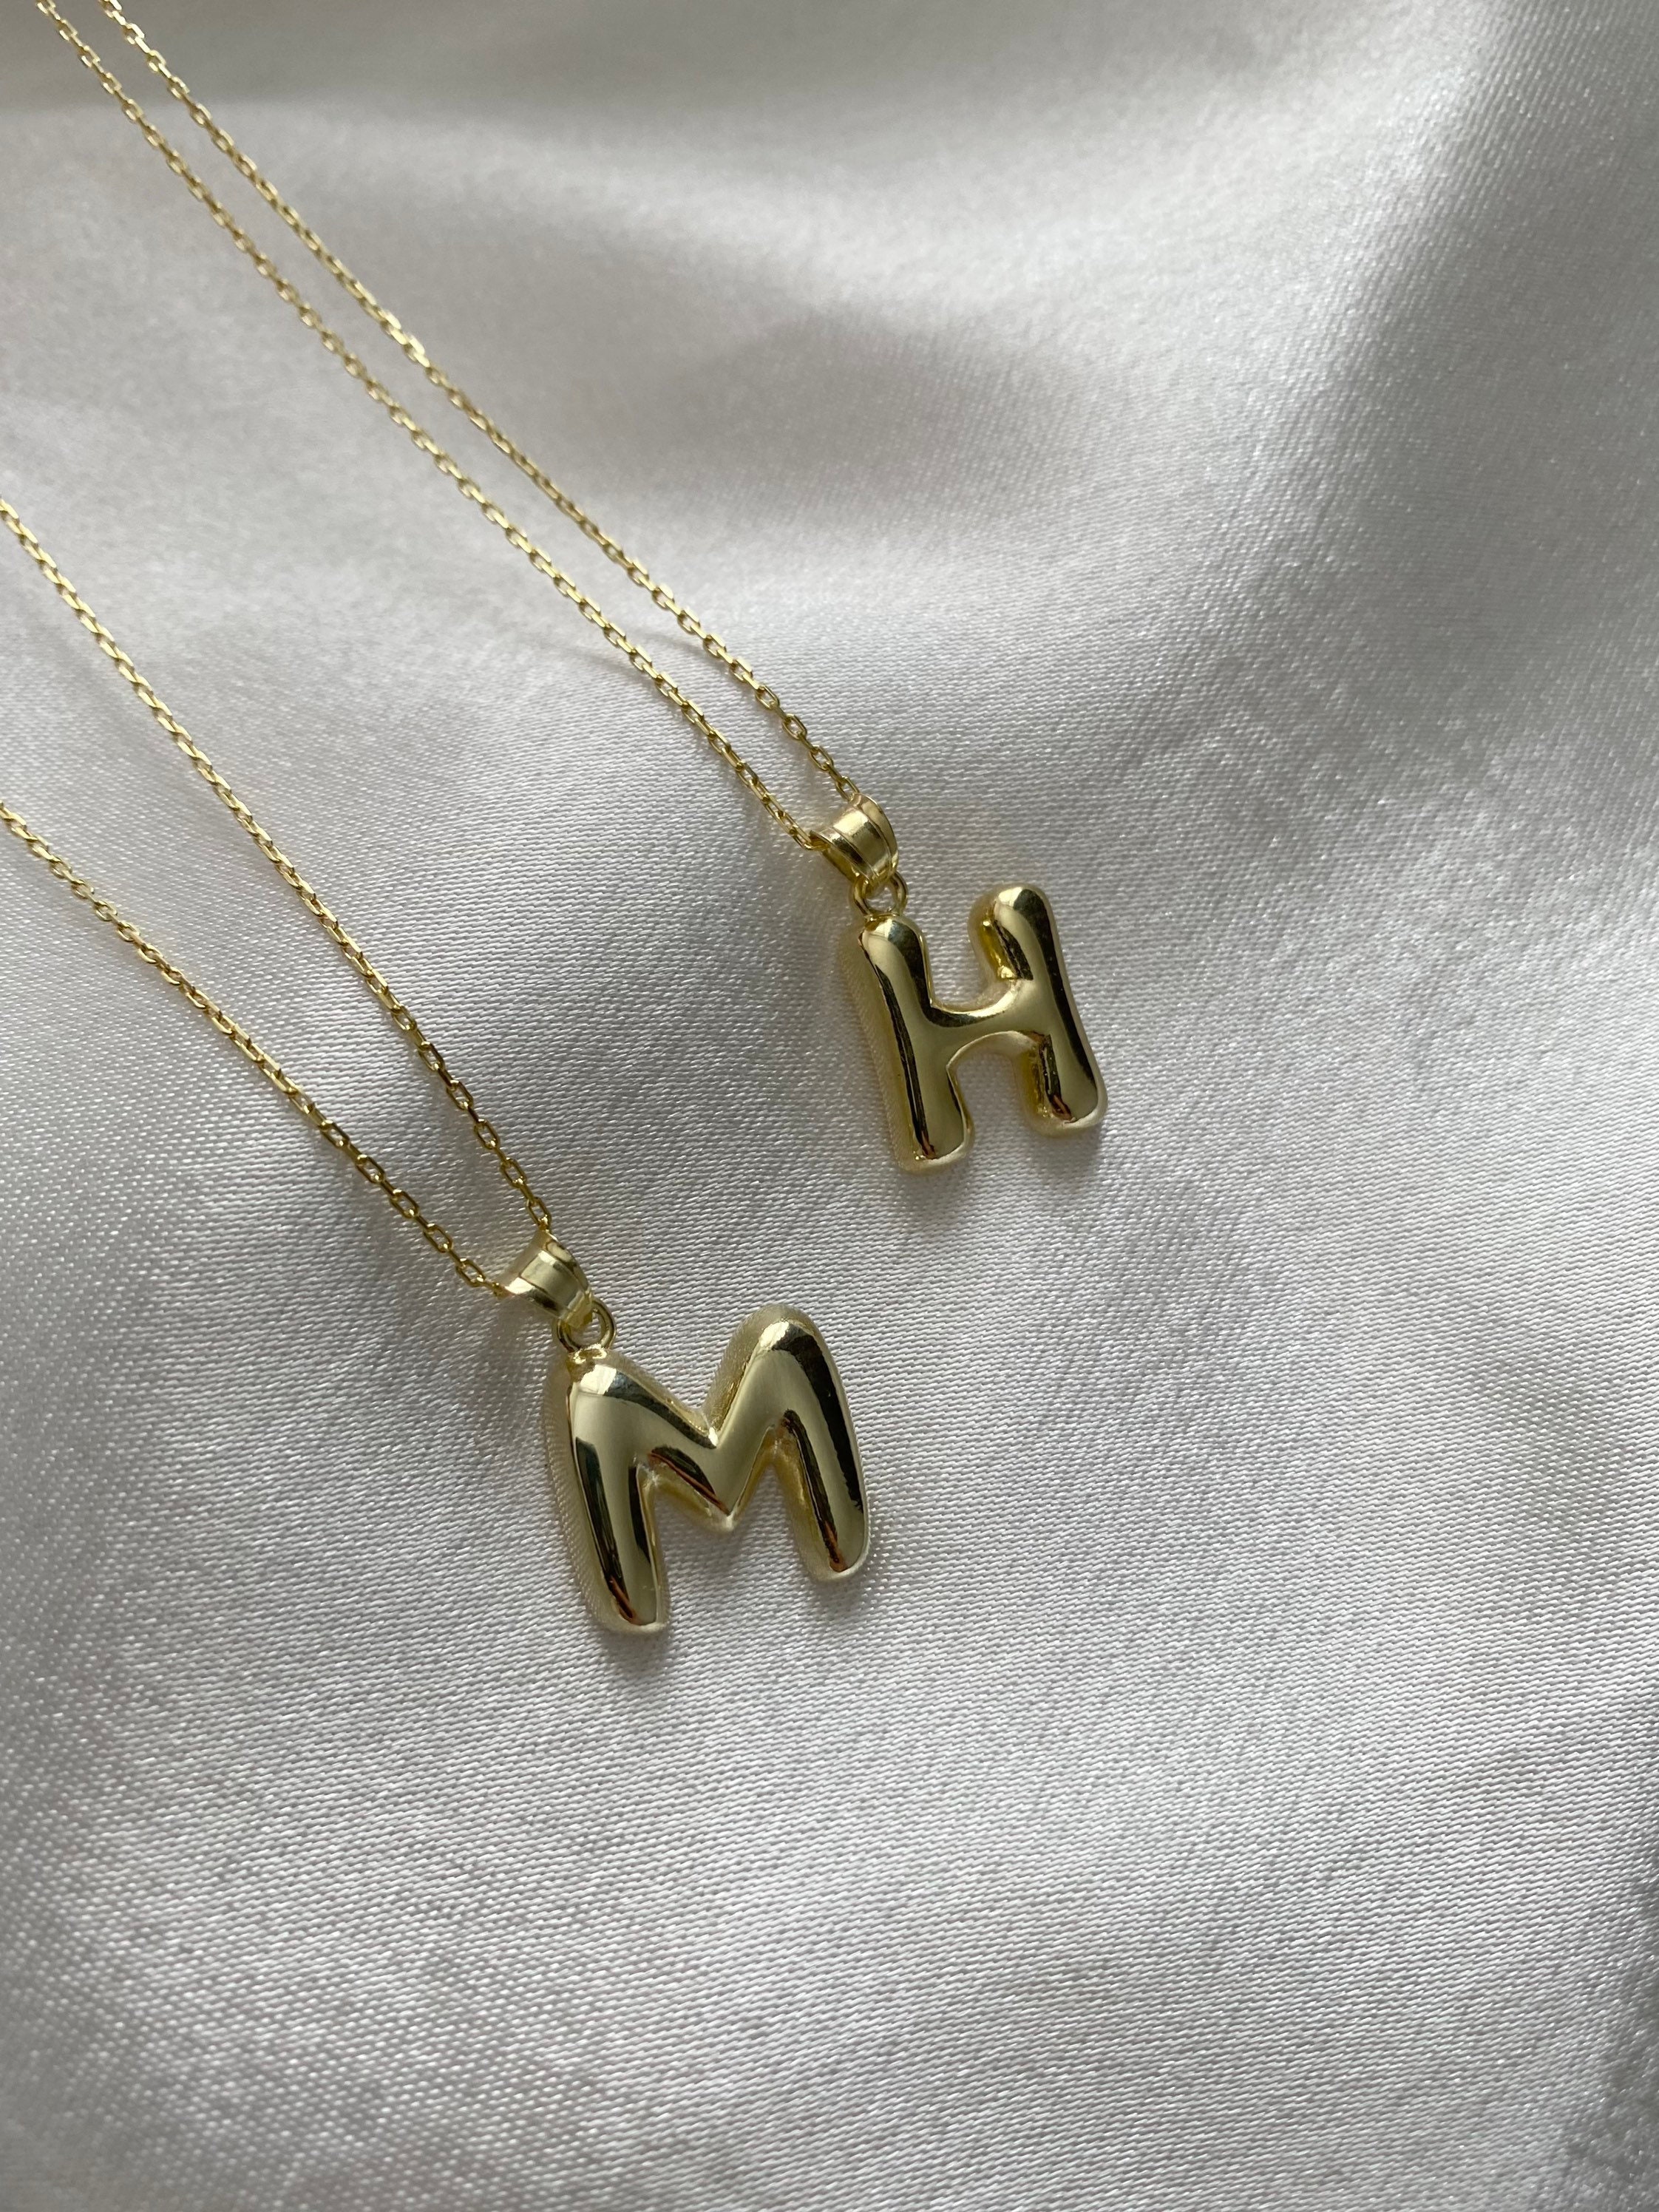 Bubble Letter Necklace, Vlessi Balloon Alphabet Pendant 18k Gold Plated  Necklace | eBay